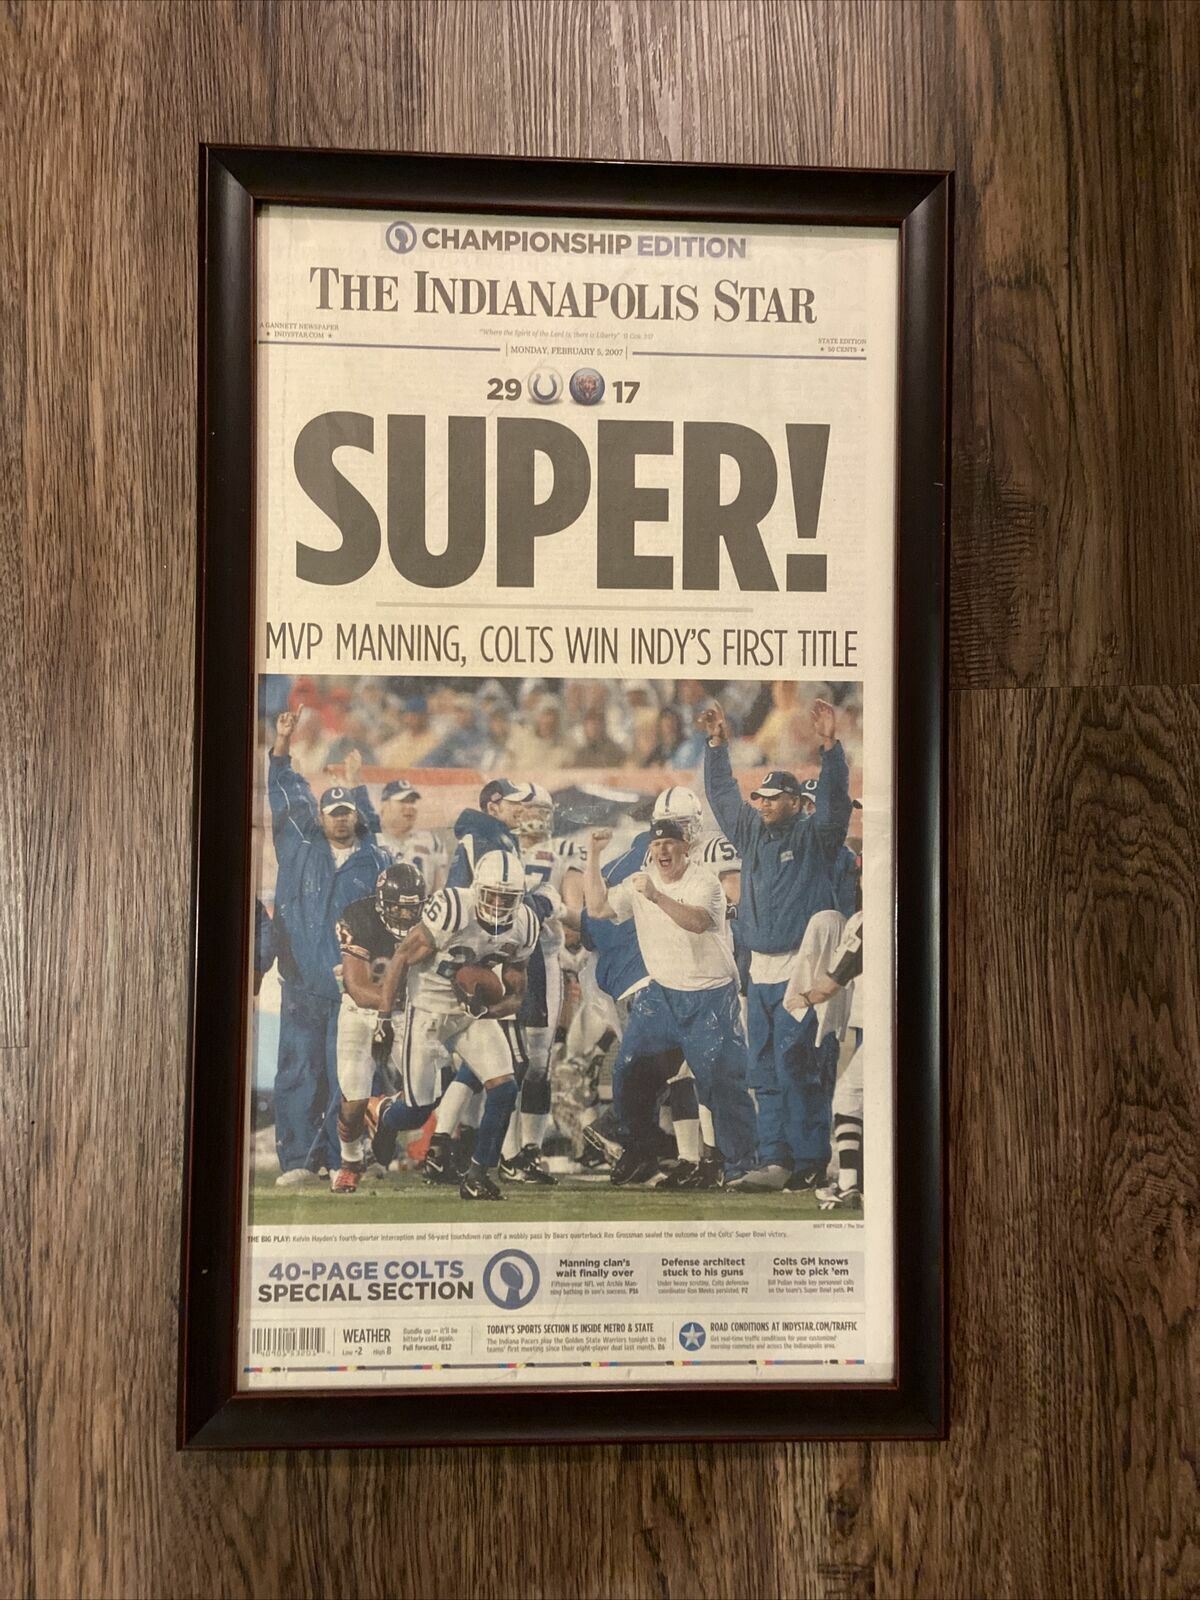 Super MVP Peyton Manning Colts Win INDY’s First Title Newspaper 2-5-2007 